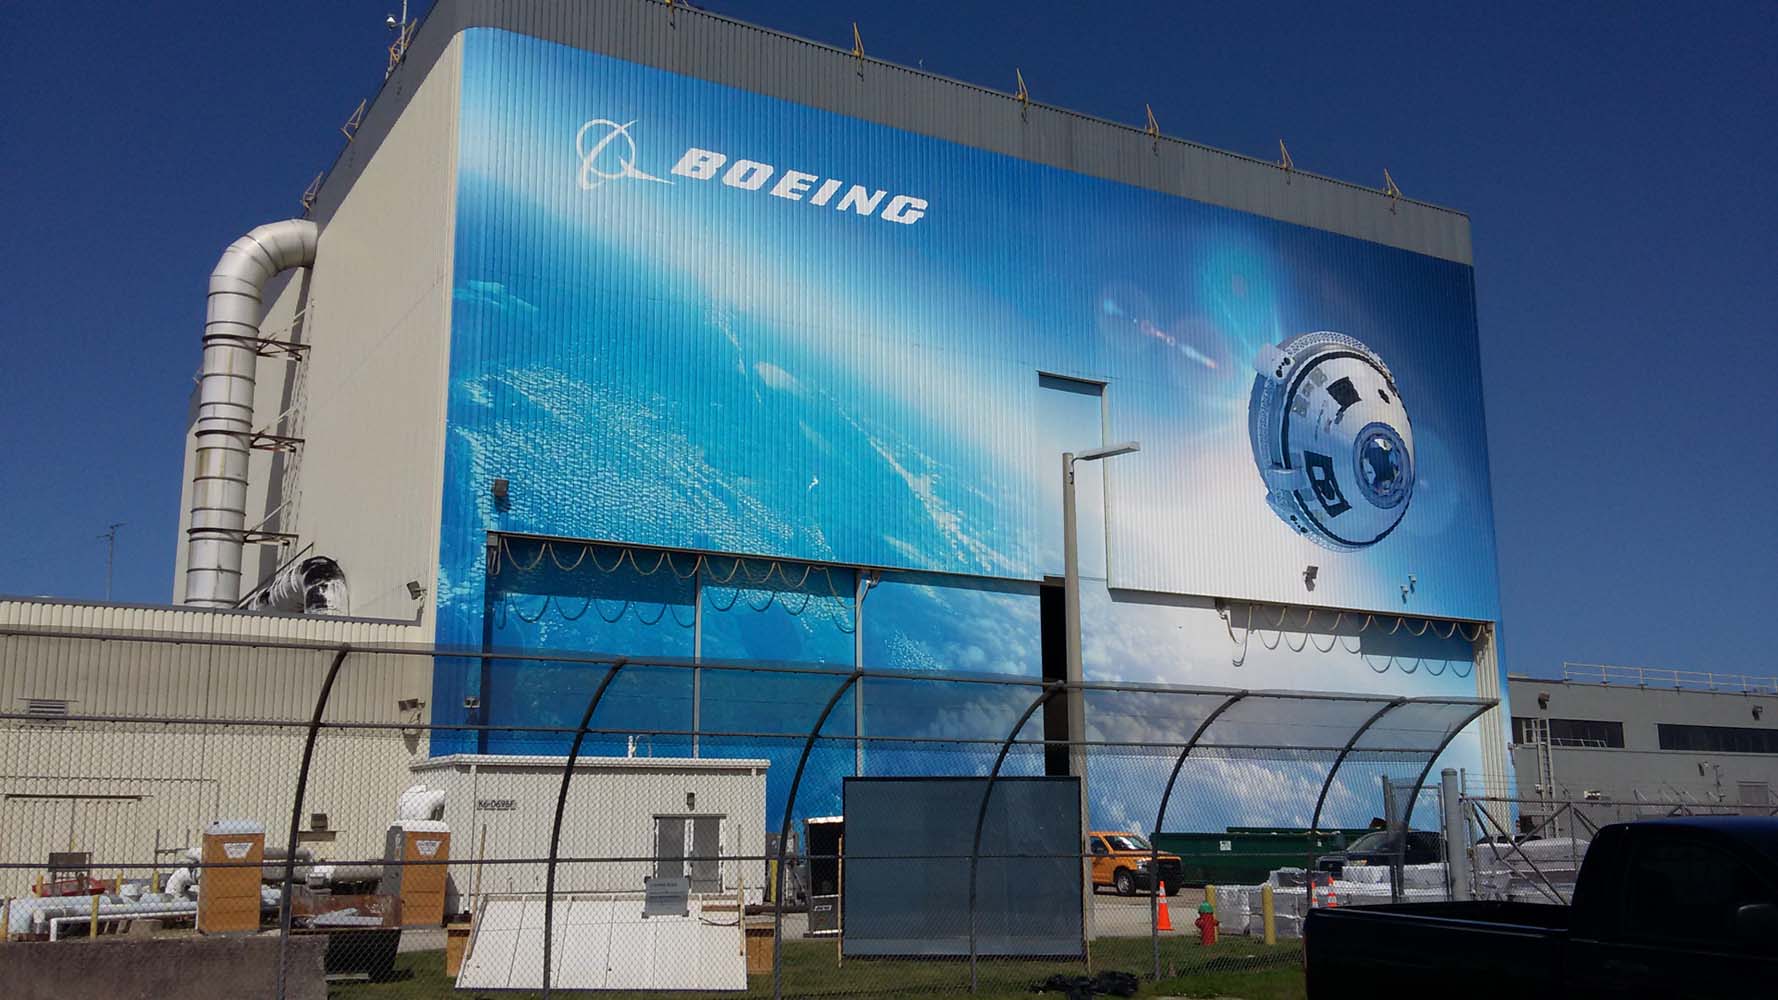 Ext Boeing gray hangar with blue space design on front